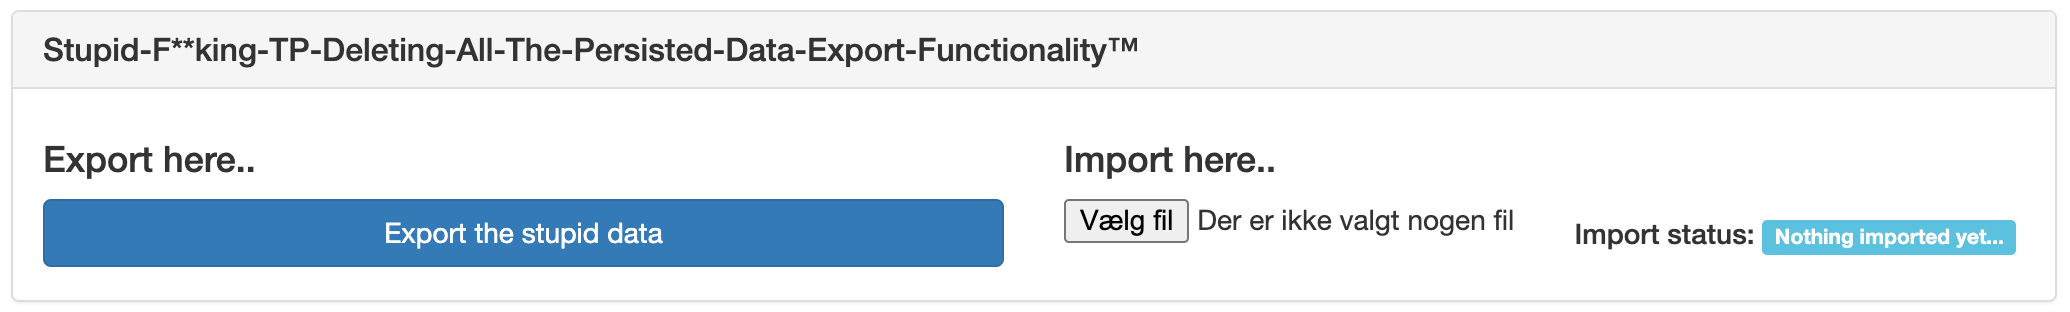 Export and import functionality